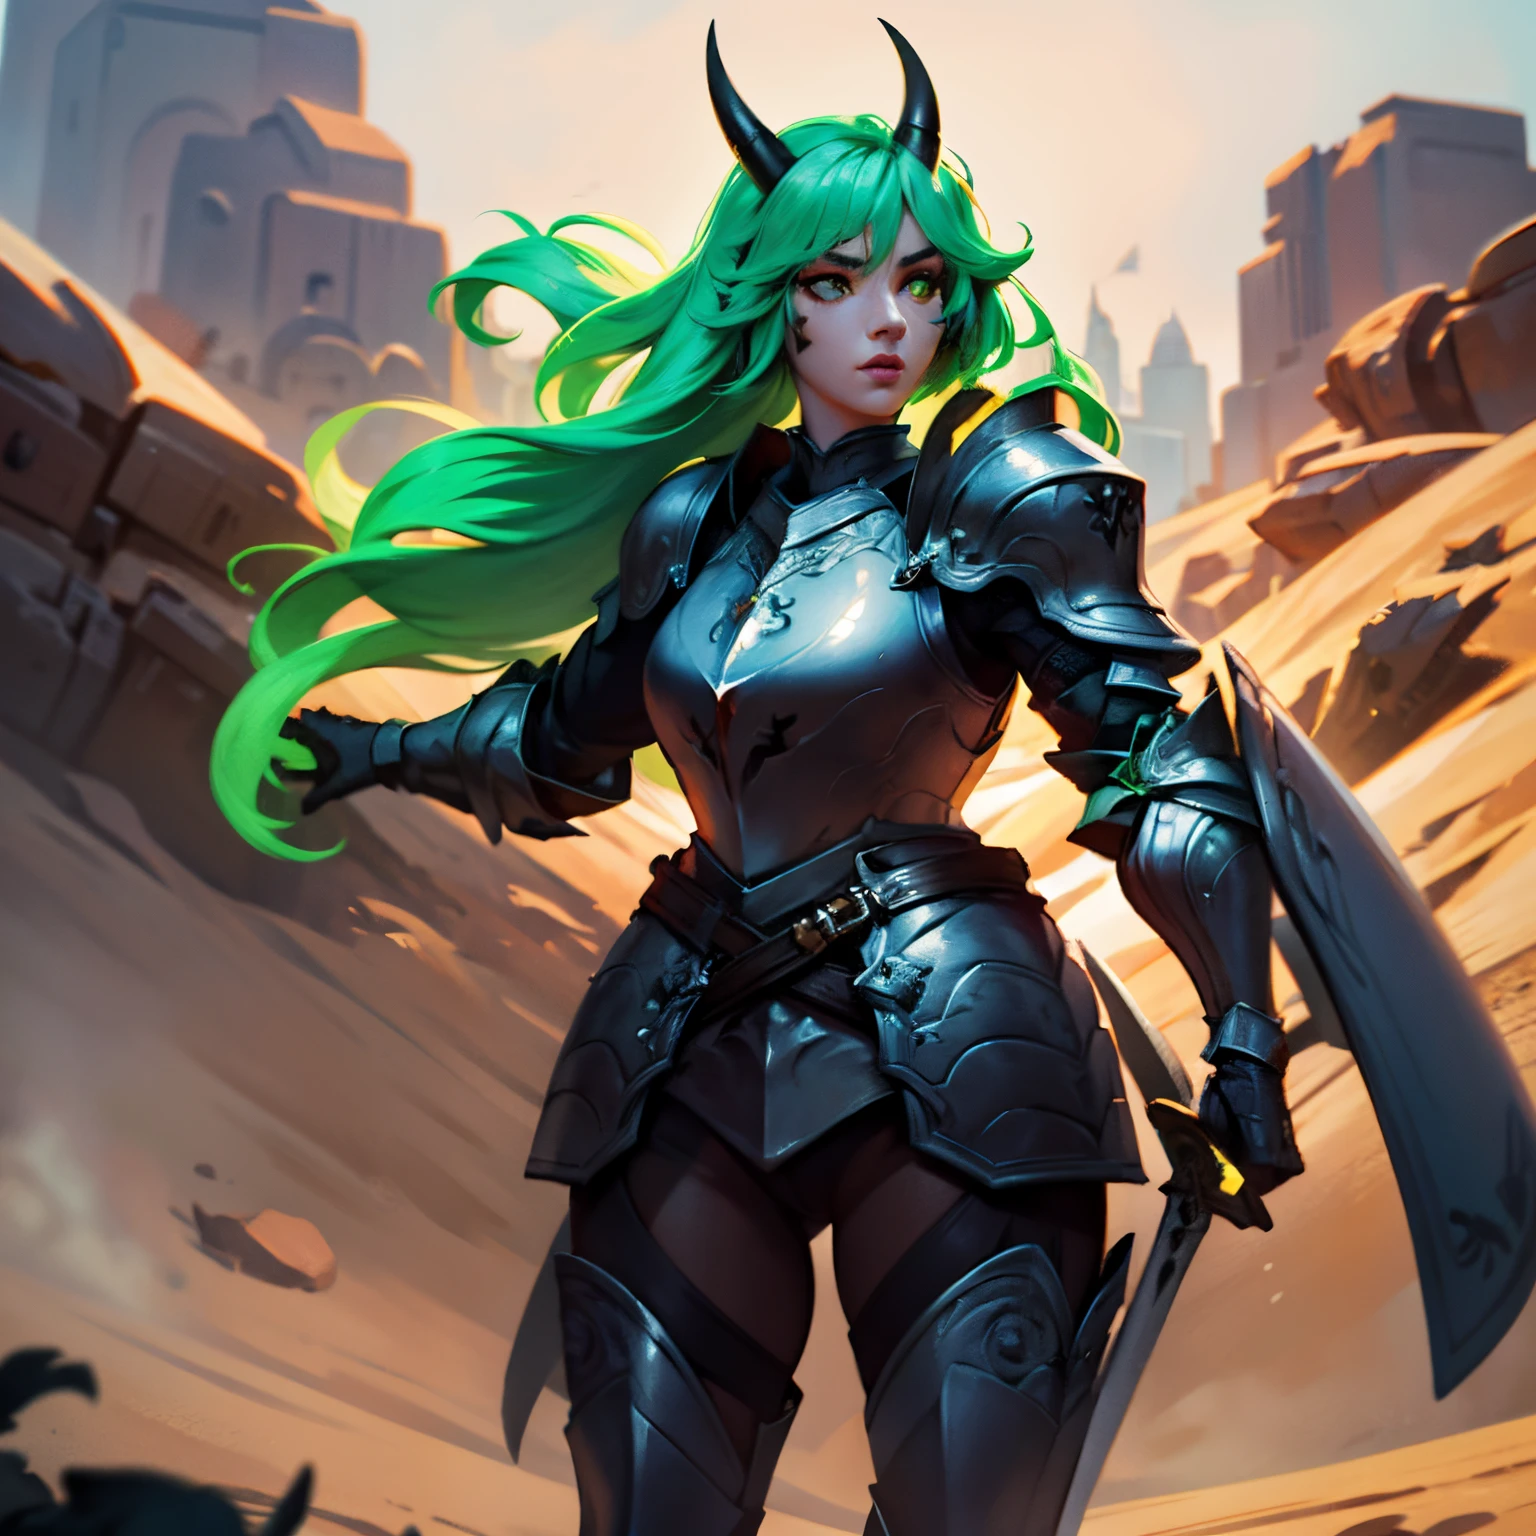 1 person, female, full body, glowing eyes, green hair color, green scale color, Ultra-detailed face, Highly Detailed Lips, Detailed Eyes, horns, standing up, wearing armor, wielding sword, in a desert